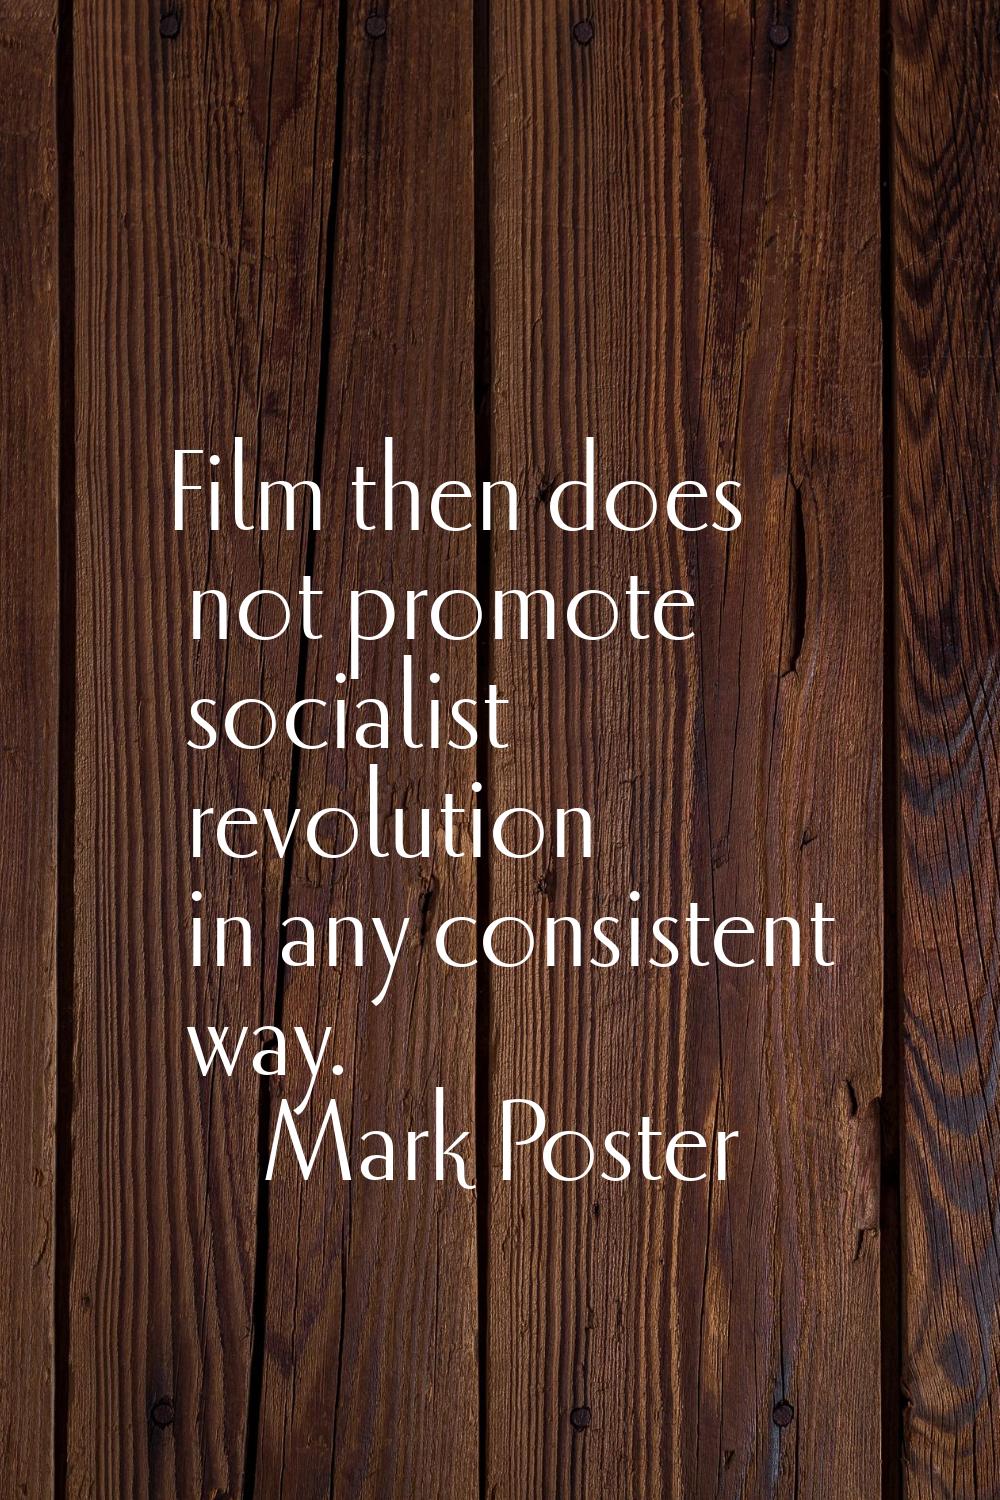 Film then does not promote socialist revolution in any consistent way.